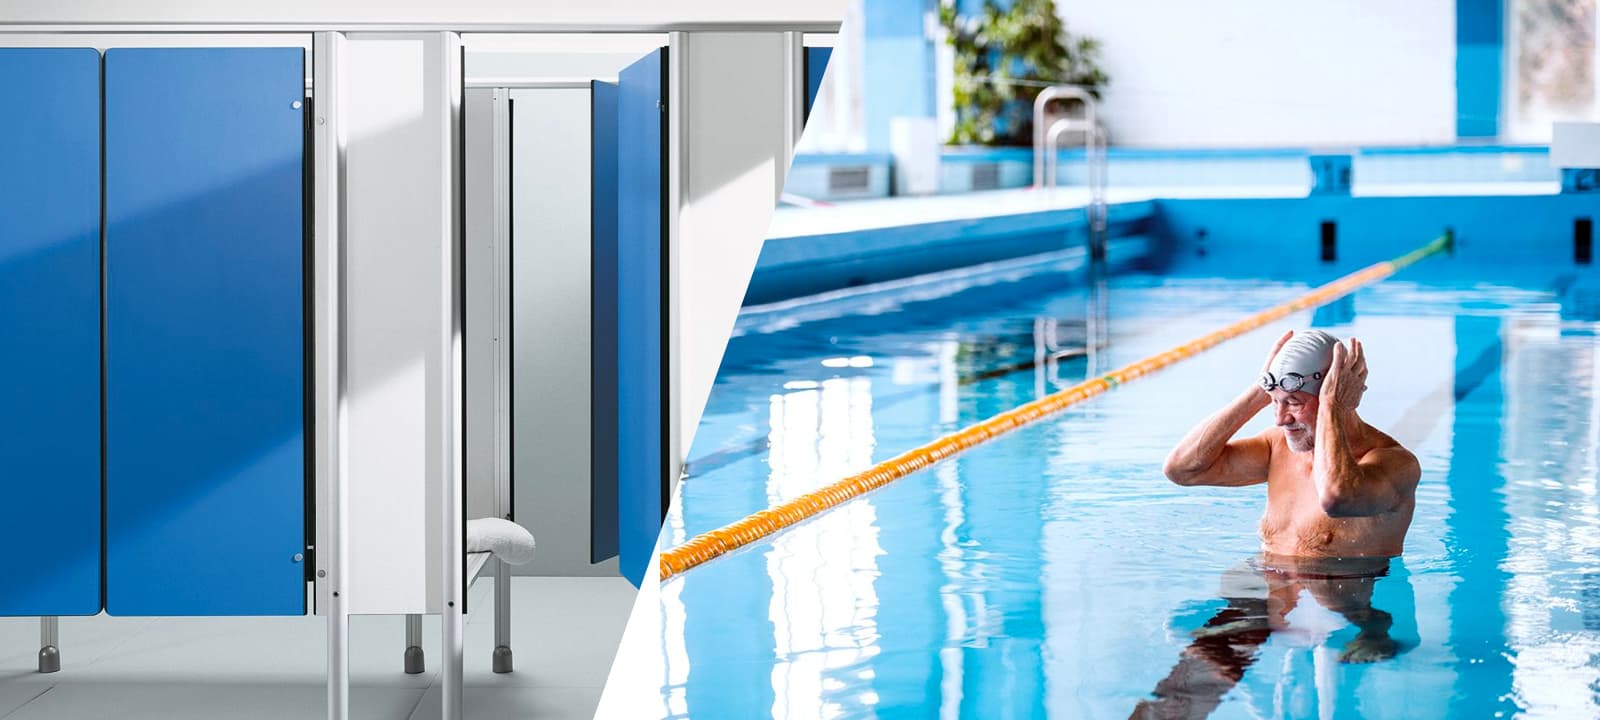 Designing hygienic services and locker rooms for swimming pools